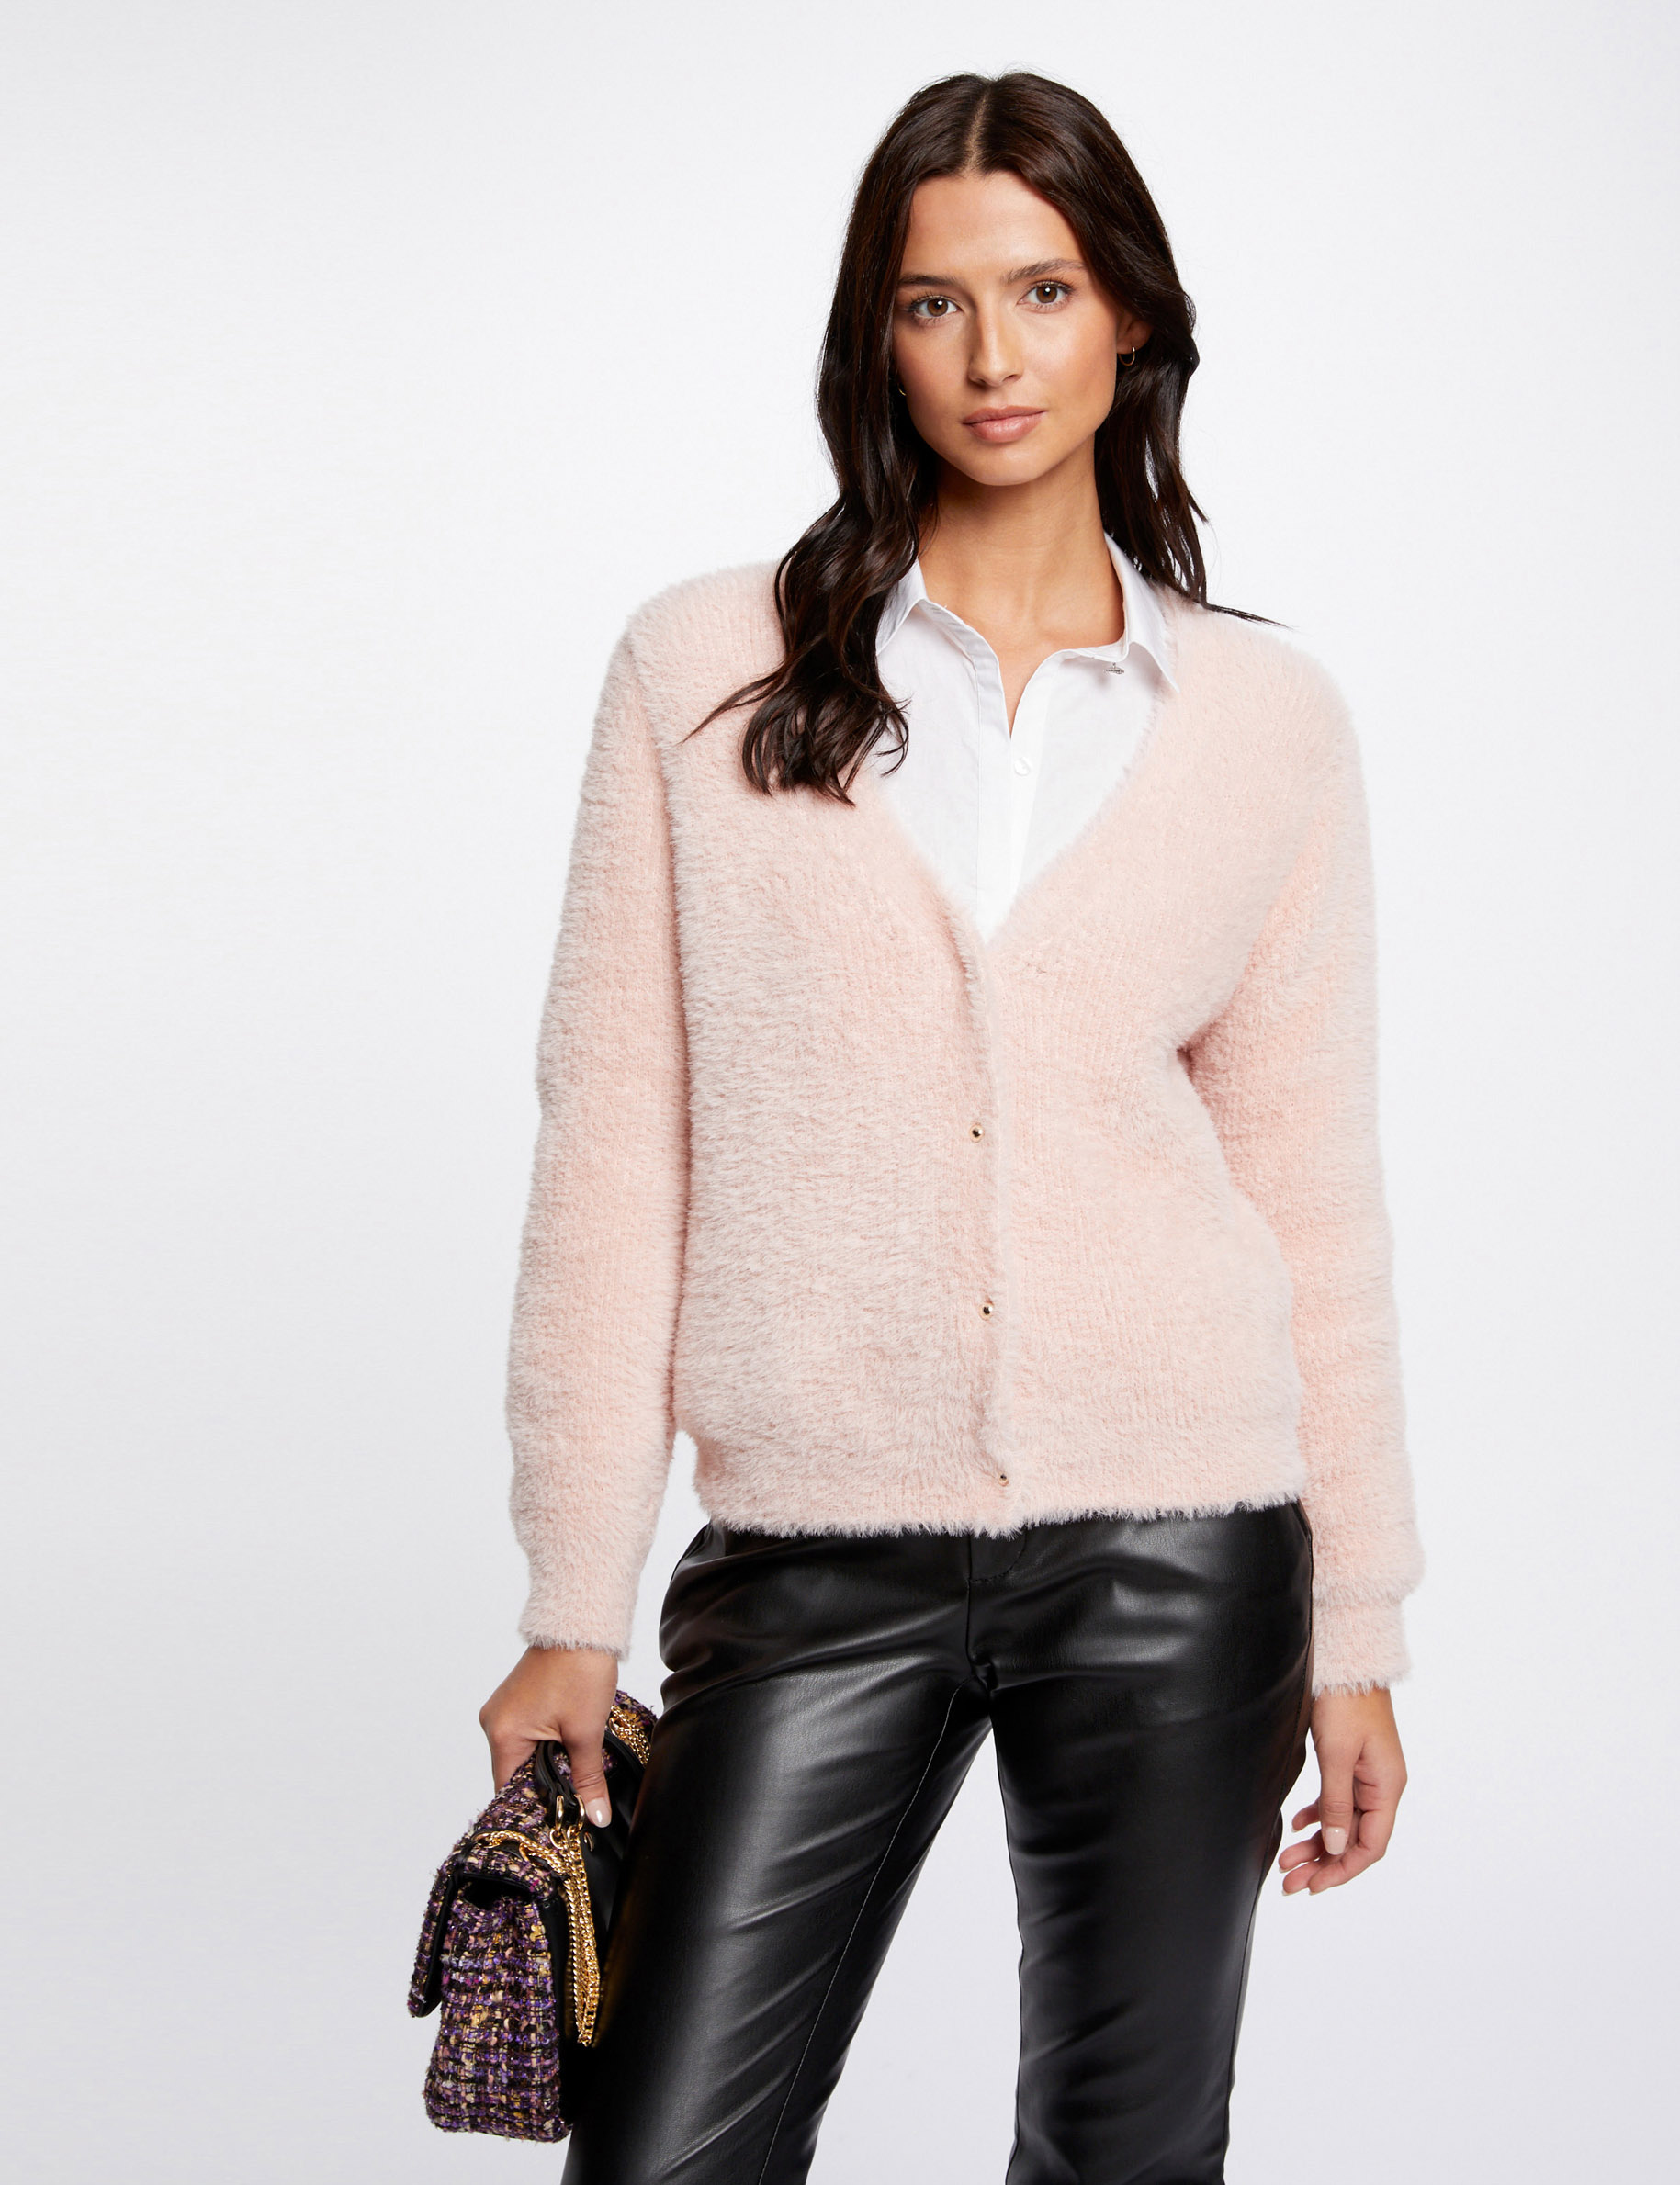 Long-sleeved cardigan with V-neck pink ladies'